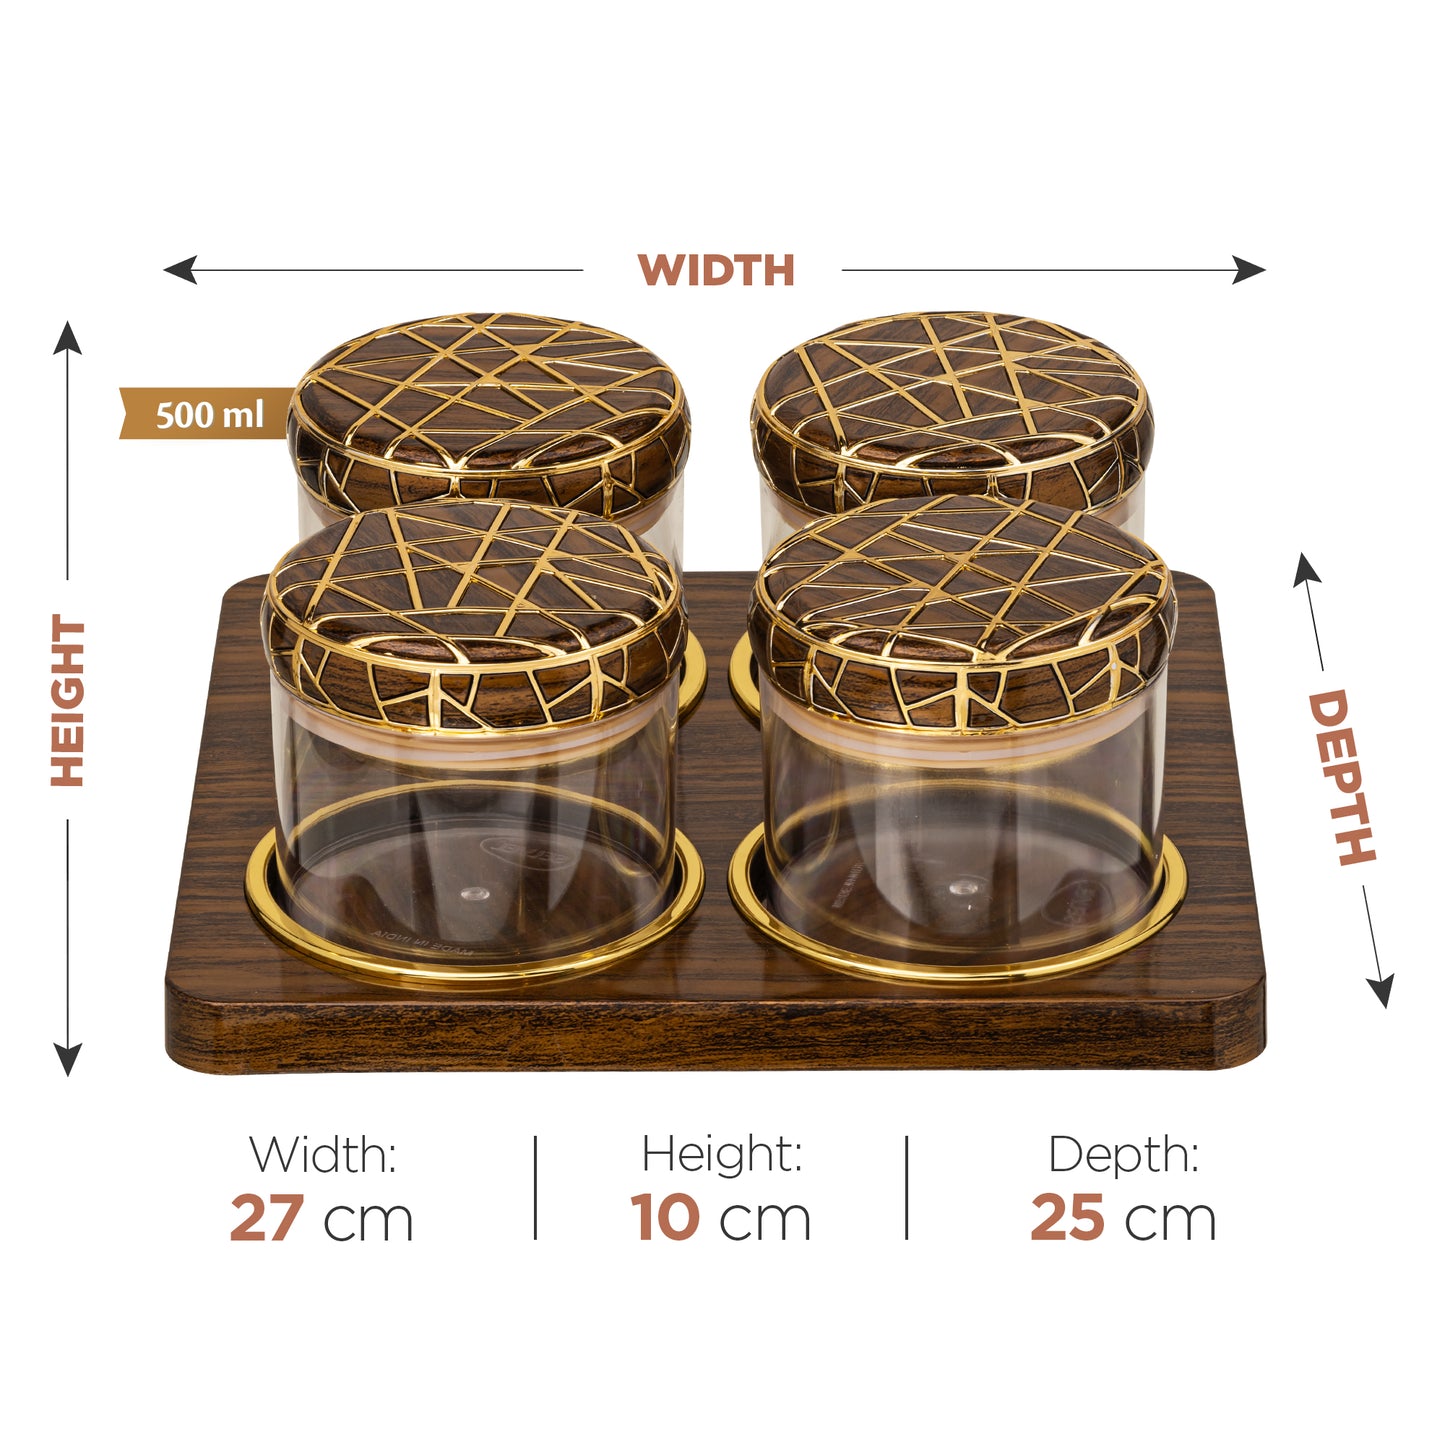 SELVEL Rosewood Airtight Dry Fruit Container Tray Set - 4 Pieces (450ml), Dark Wood Polypropylene with Luxurious Gold Foil Embellishments